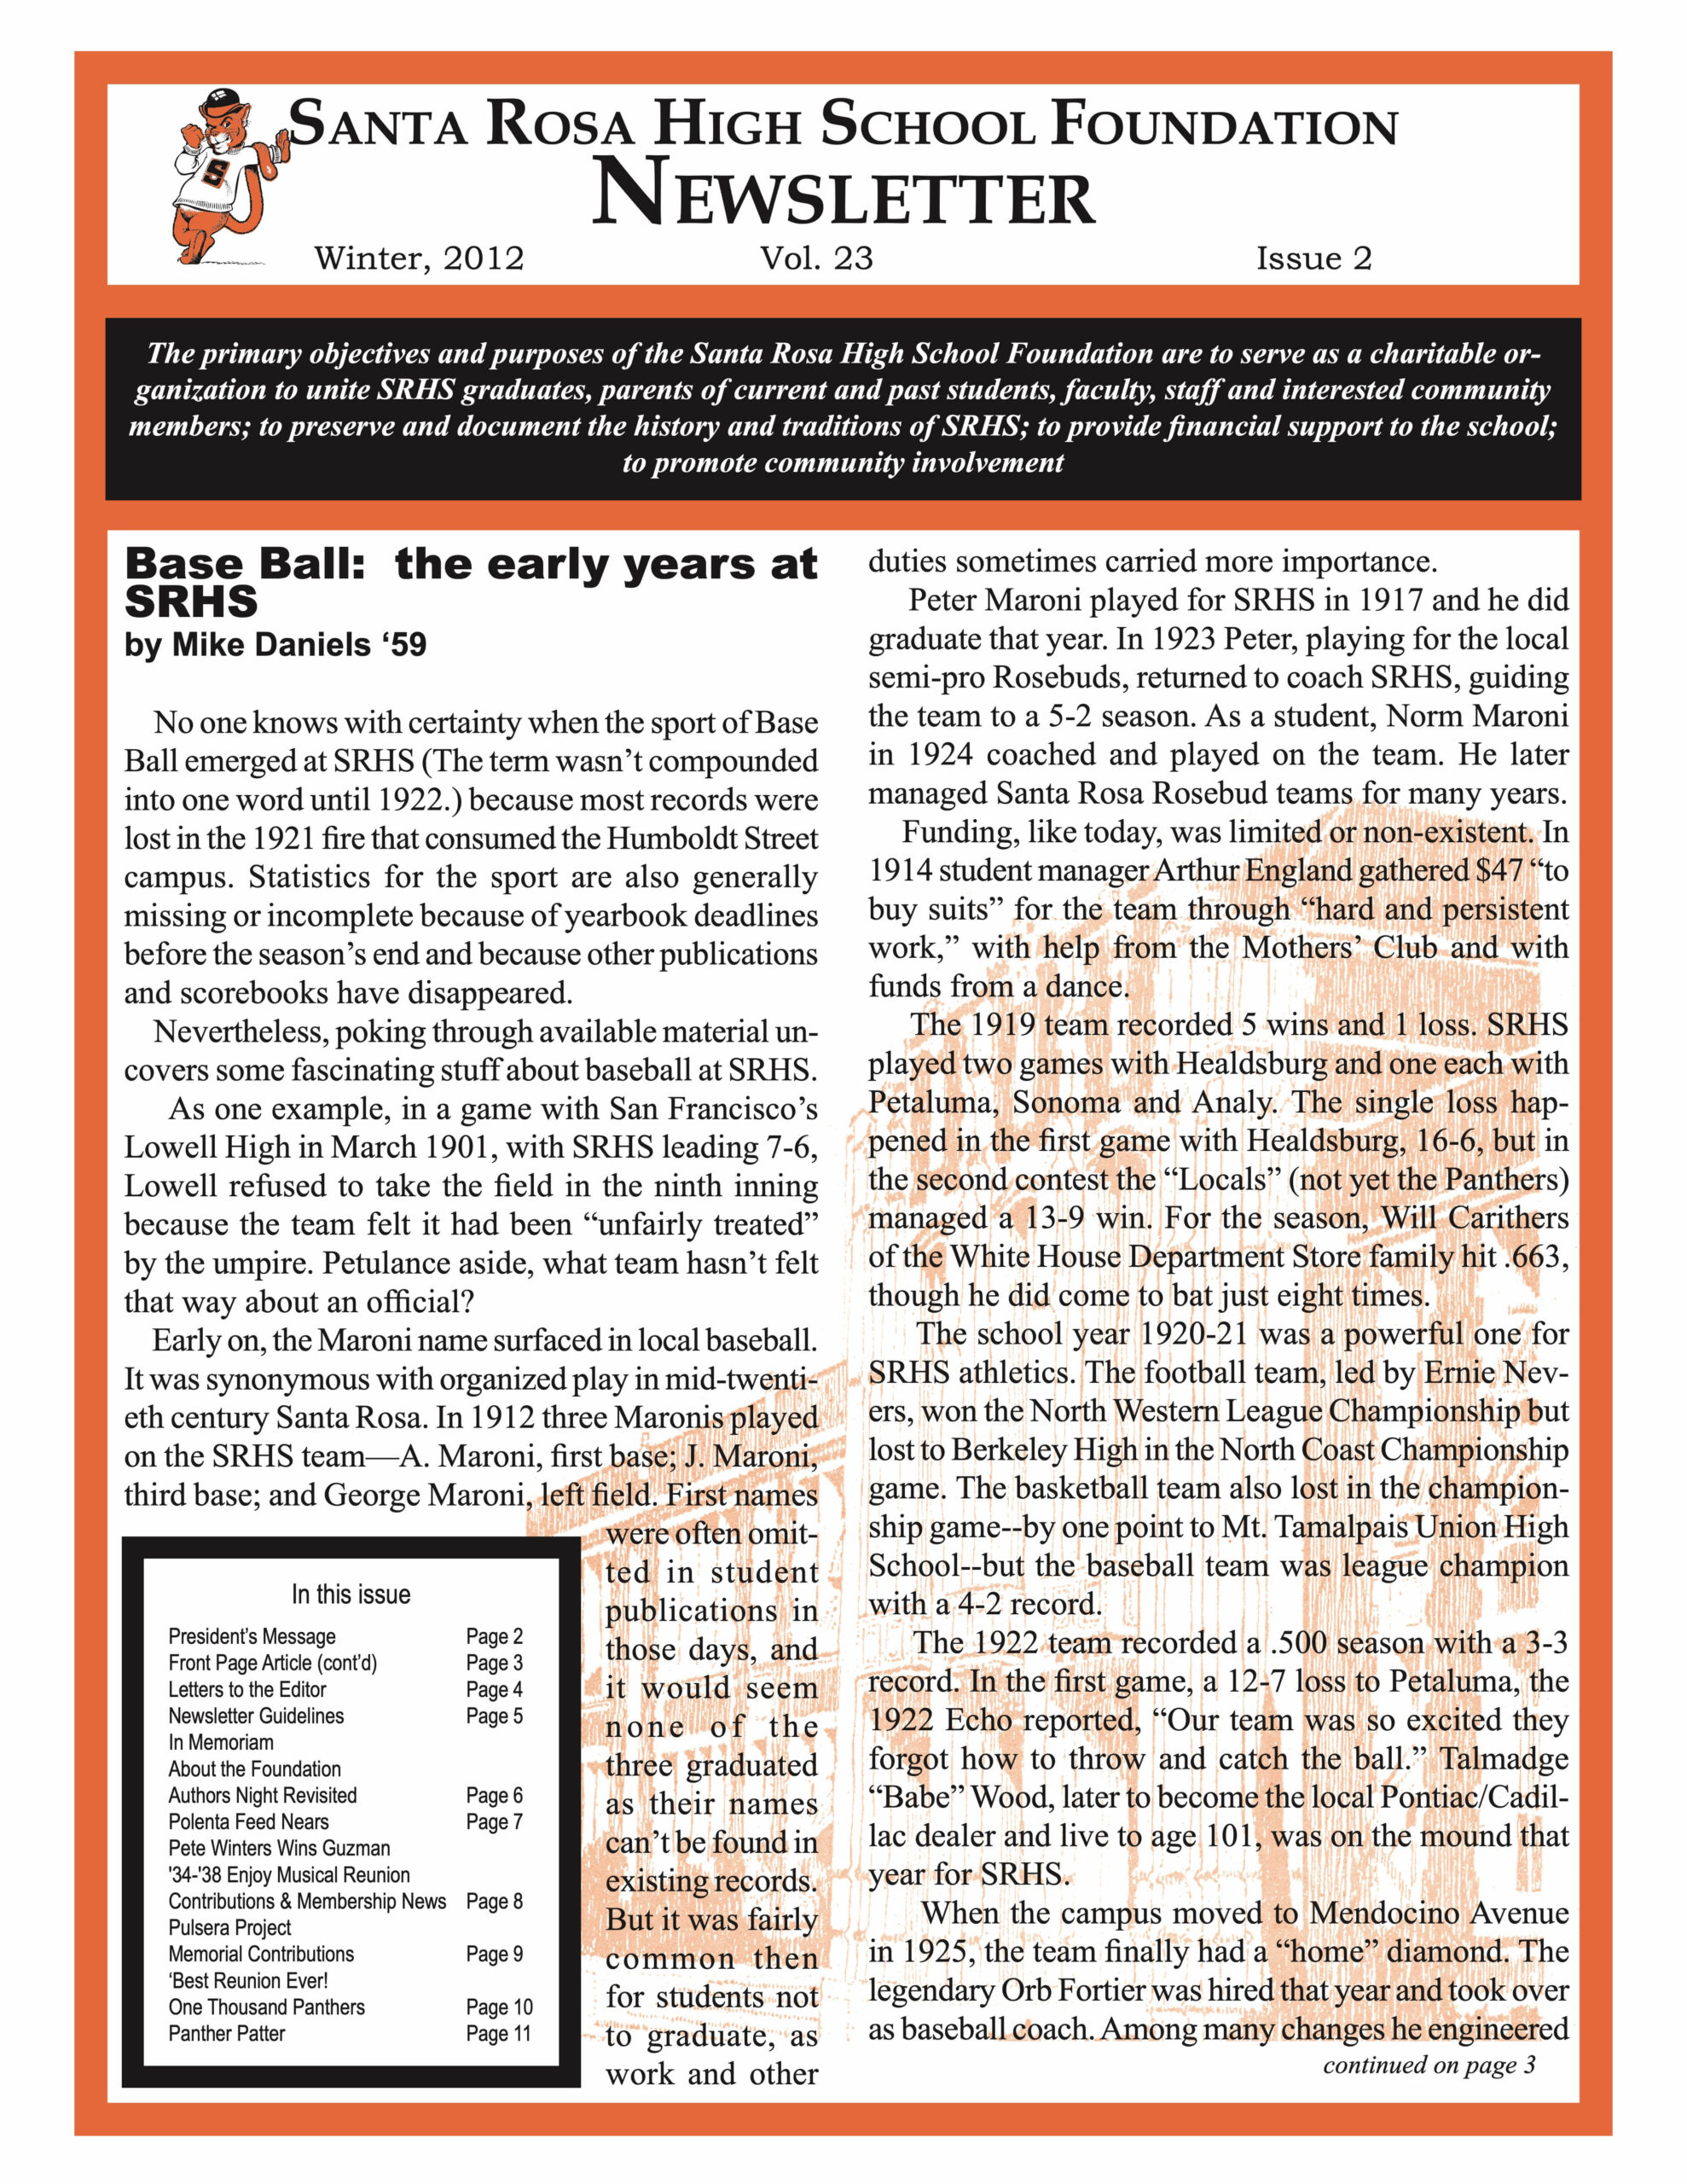 Newsletter front page - Winter 2012